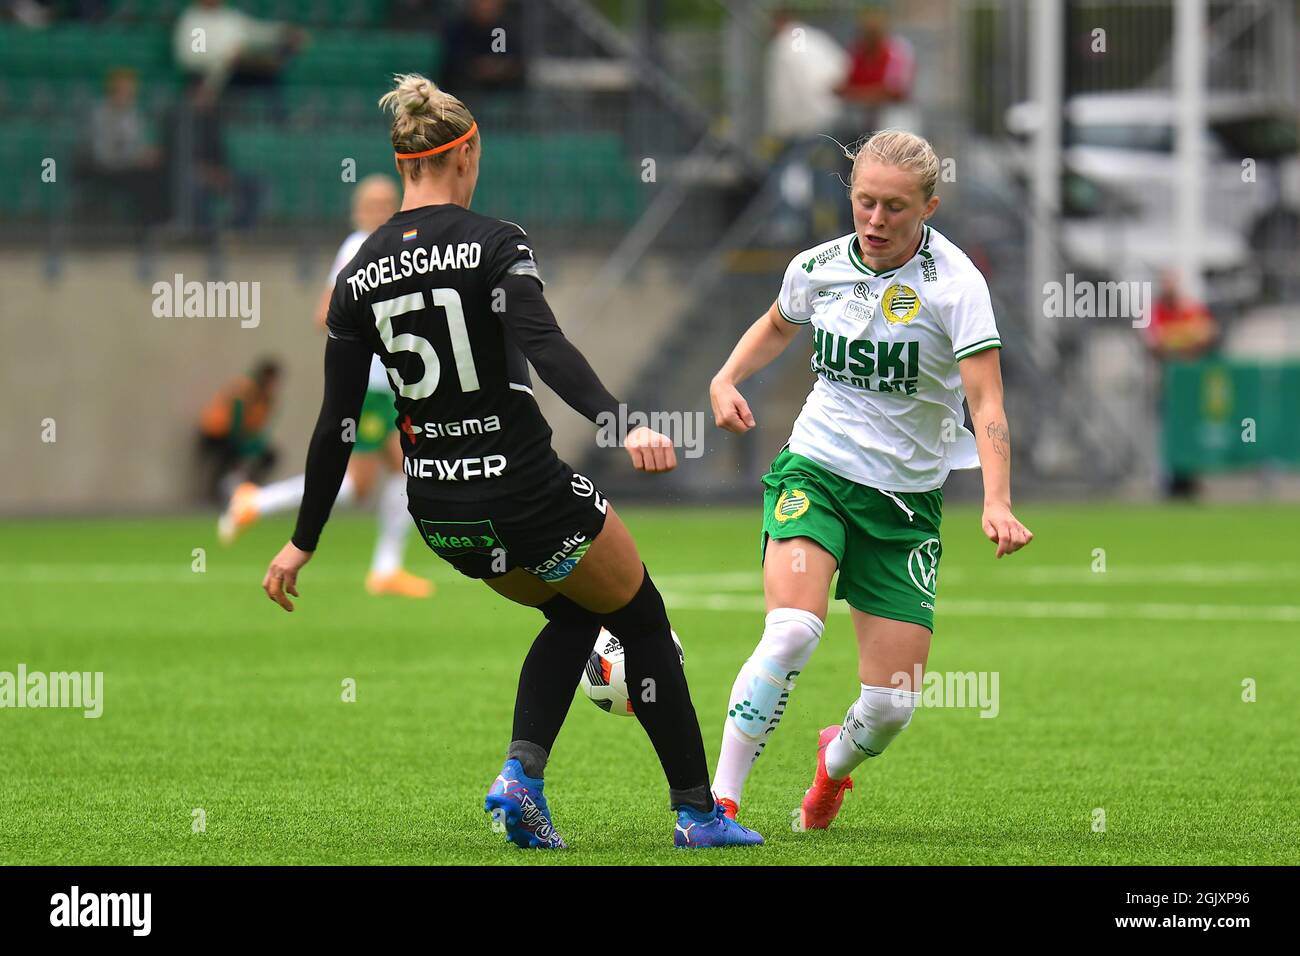 Stockholm, Sweden. 12th Sep, 2021. Fanny Hjelm (6 Hammarby) and Sanne  Troelsgaard (51 FC Rosengard) during the game in the Swedish League OBOS  Damallsvenskan on September 12th 2021 between Hammarby IF and